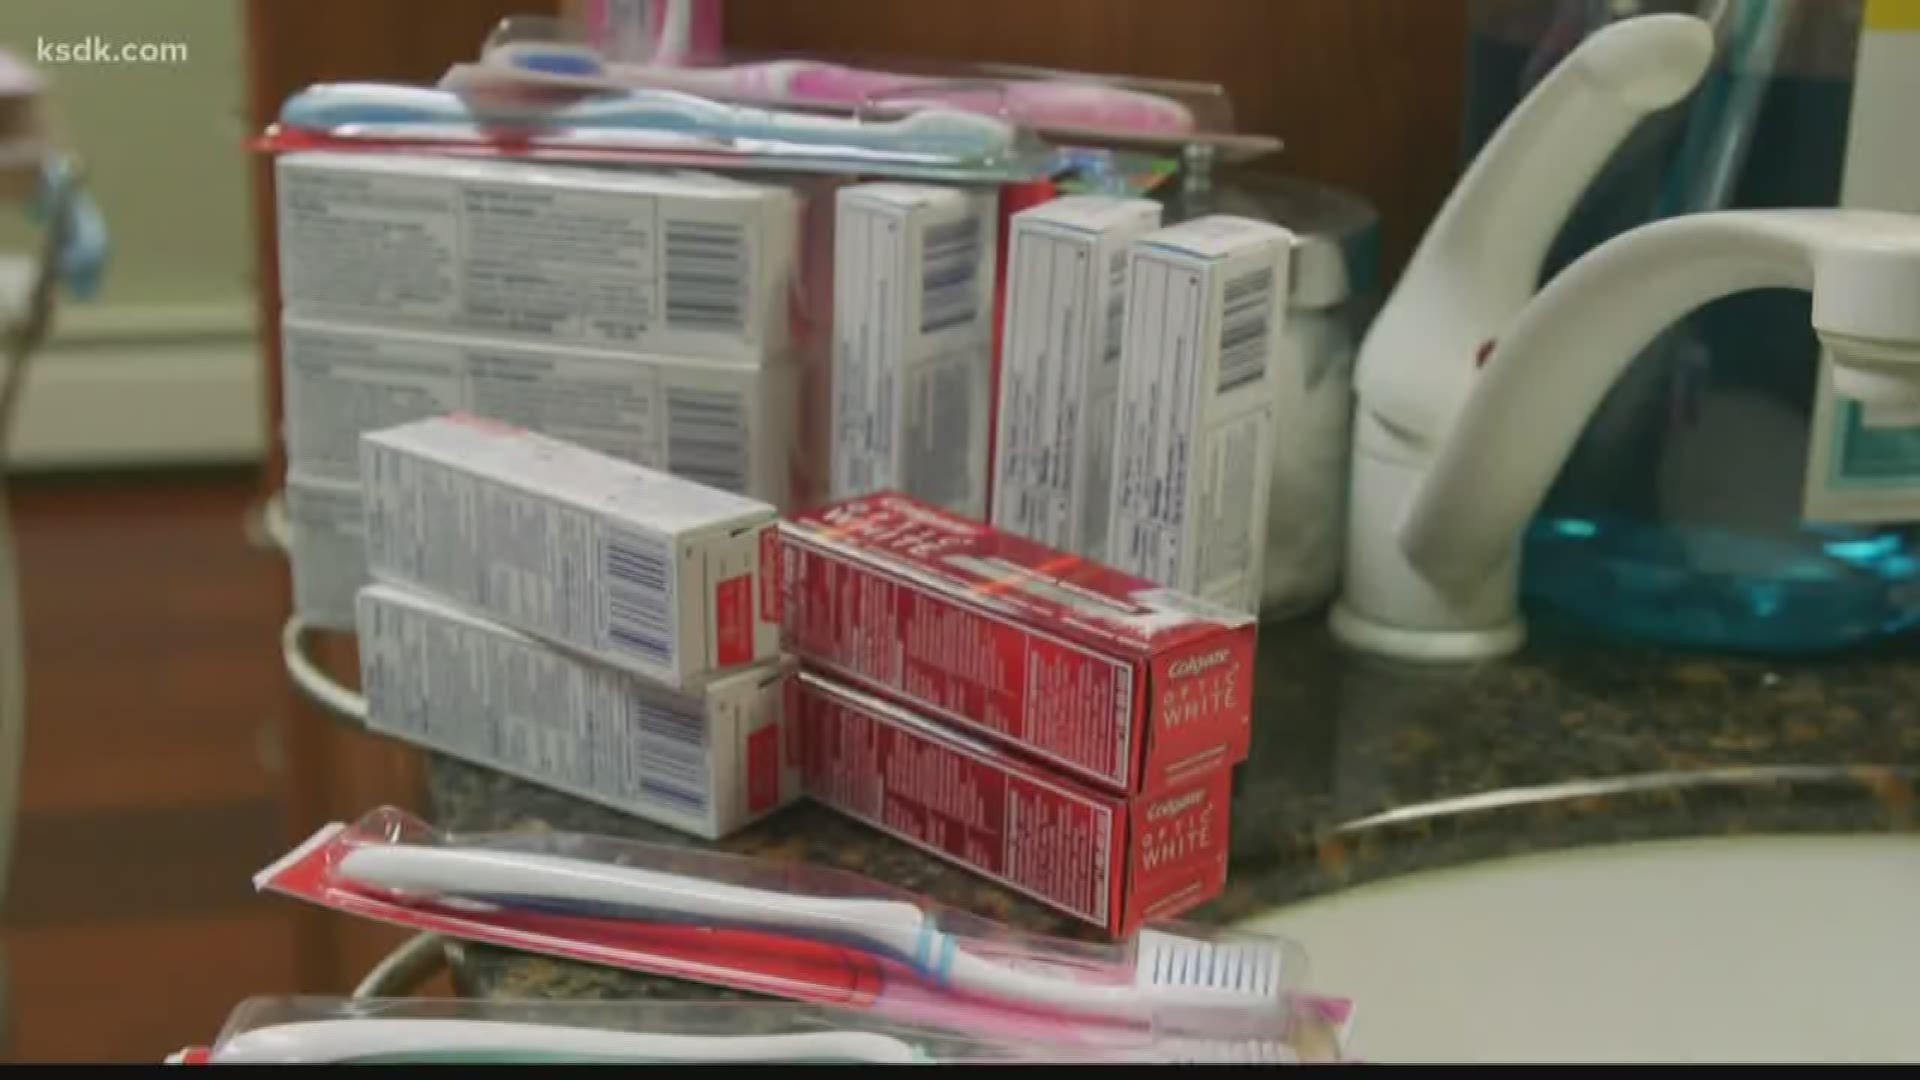 Consumer Reports said if you have an older tube of toothpaste, you may want to toss it.